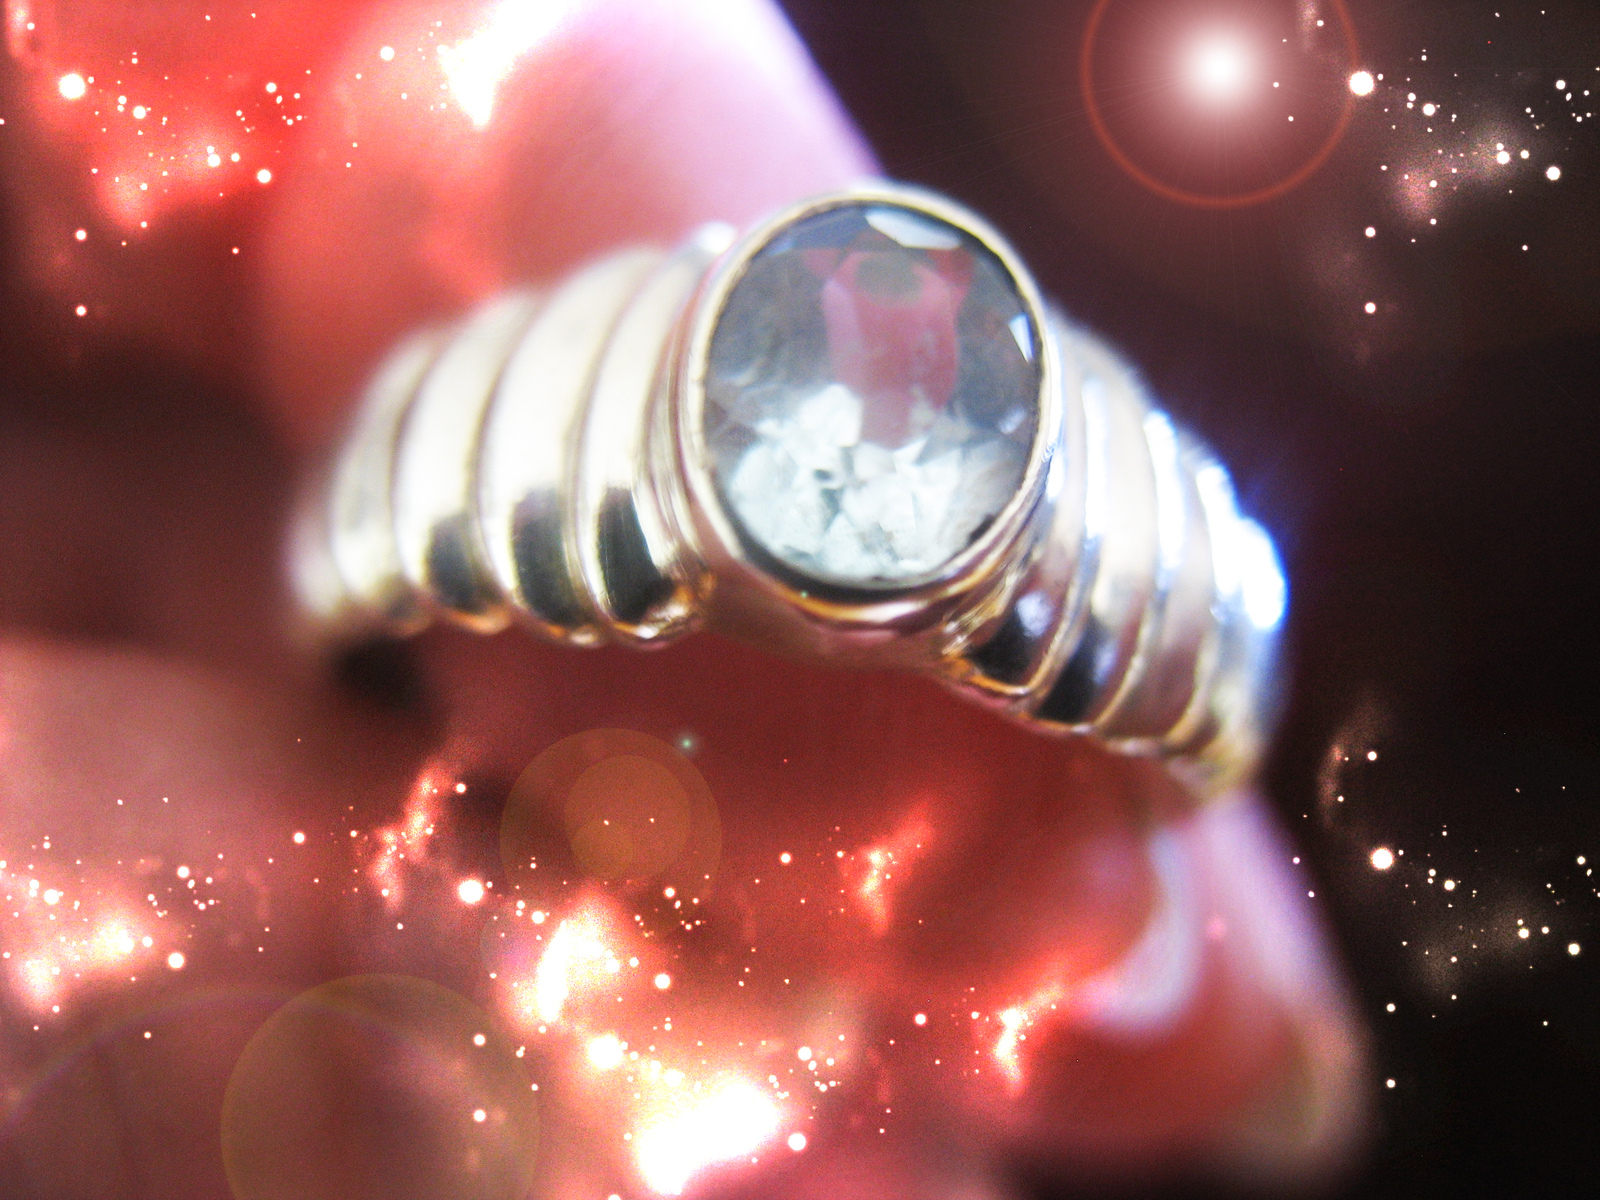 HAUNTED RING ETERNAL WEALTH & SUCCESS EXTREME SUCCESS POWER GOLDEN ROYAL MAGICK - $505.77